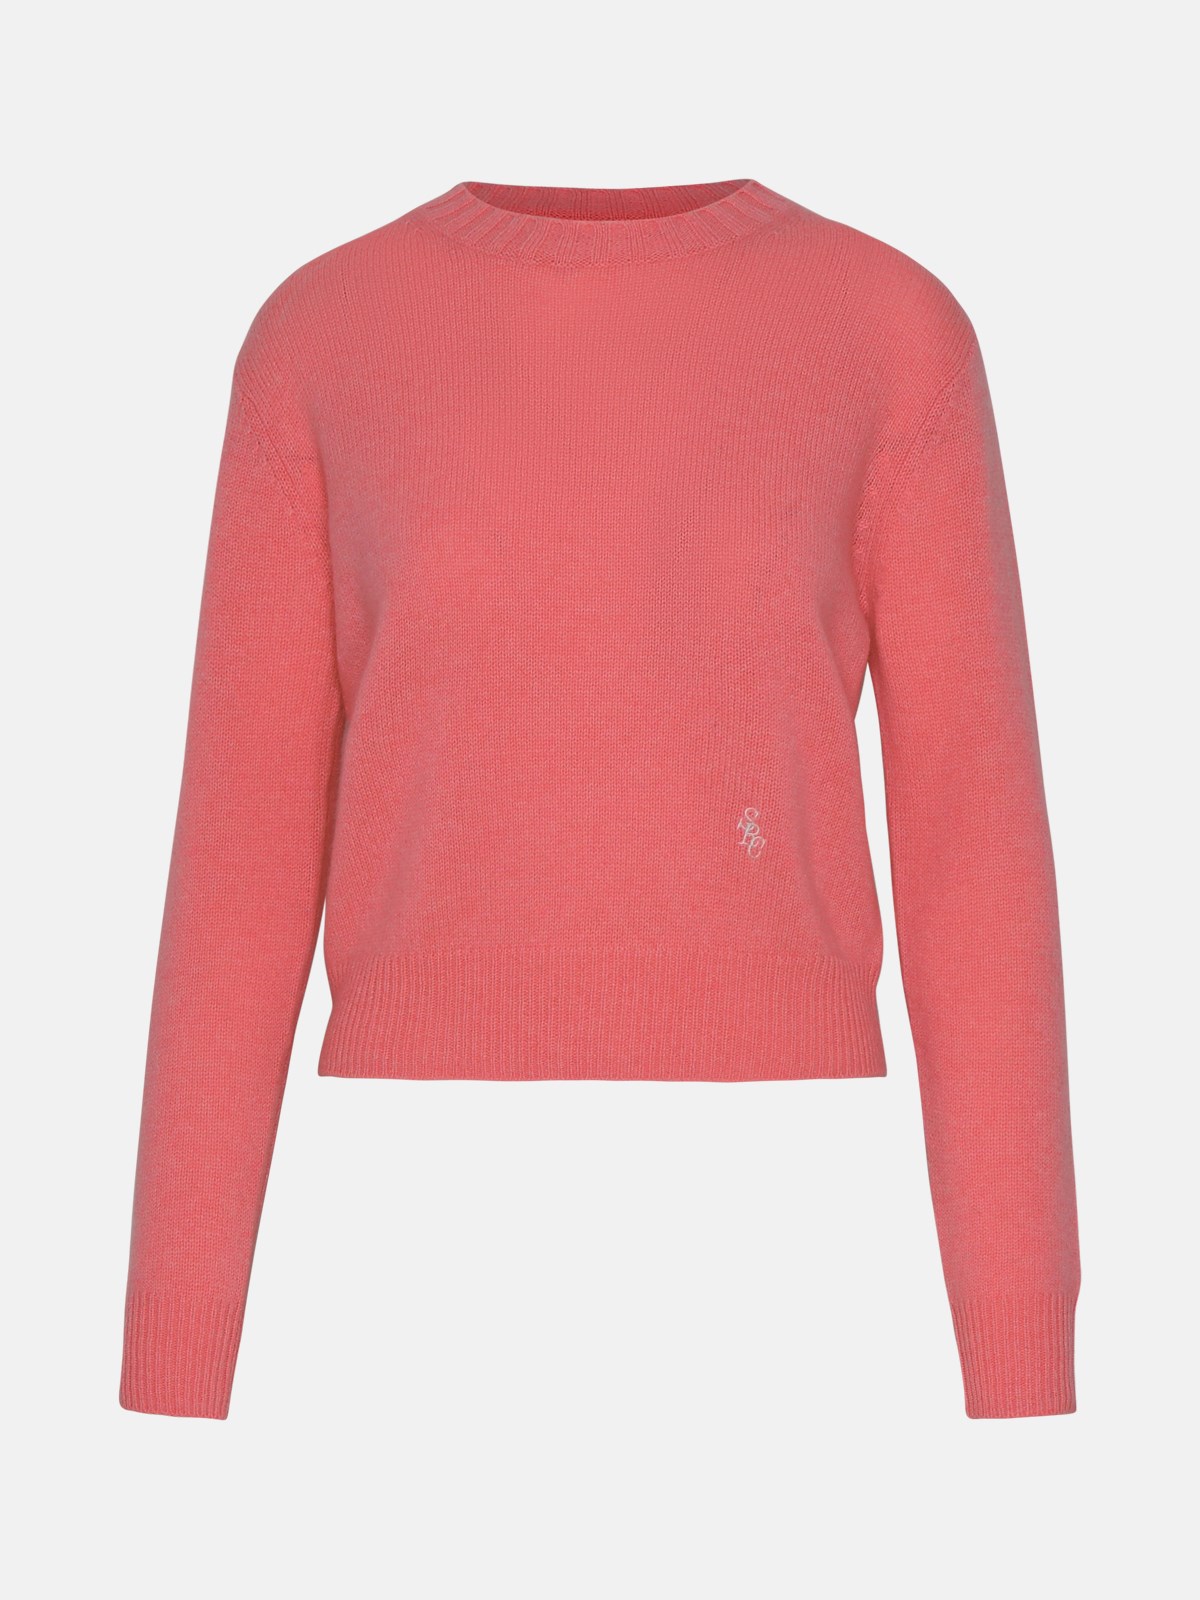 Sporty And Rich Kids' Pink Cashmere Sweater